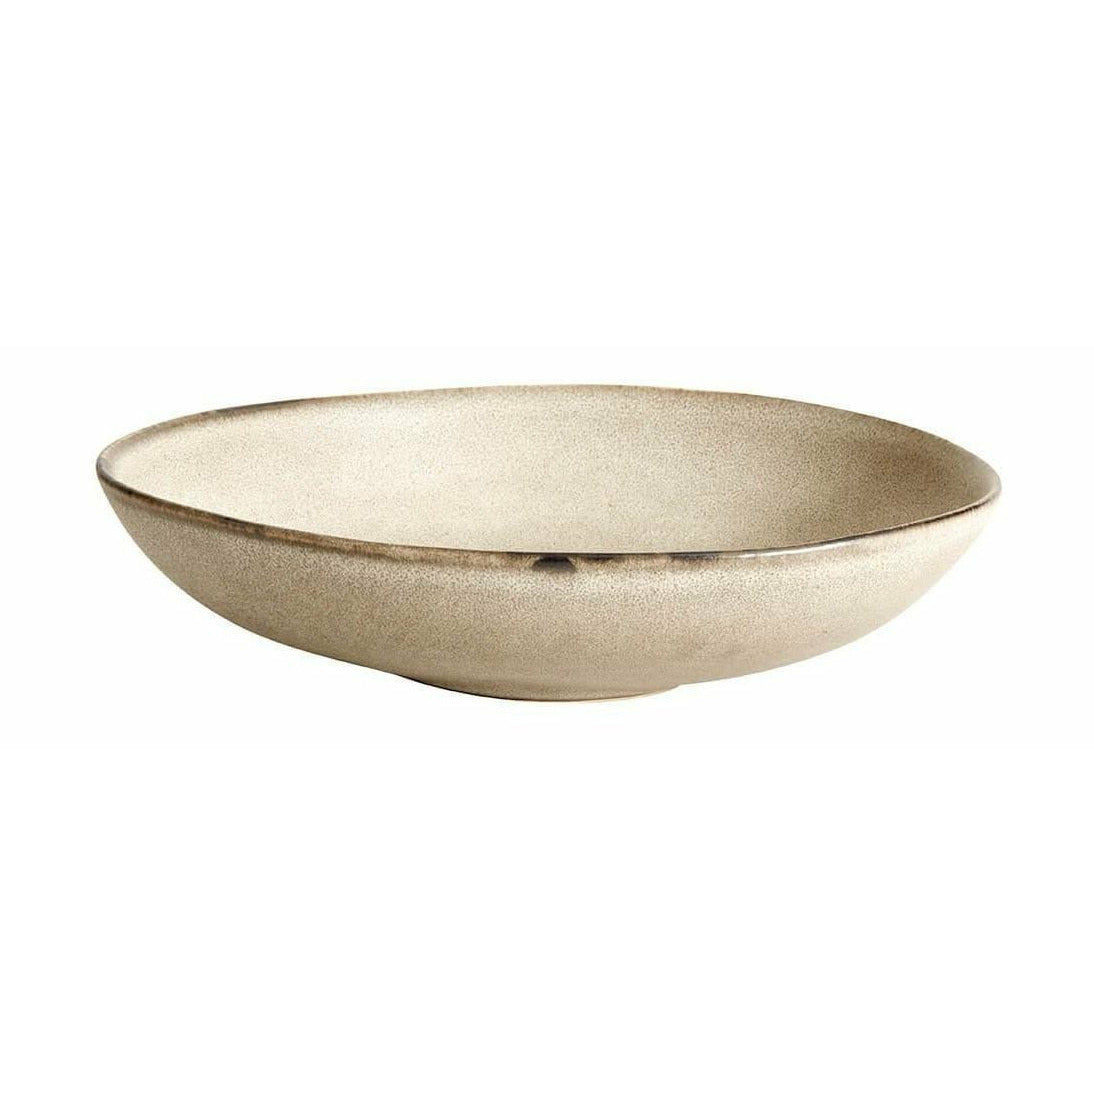 Muubs Mame Siring Bowl Oyster, 19 cm